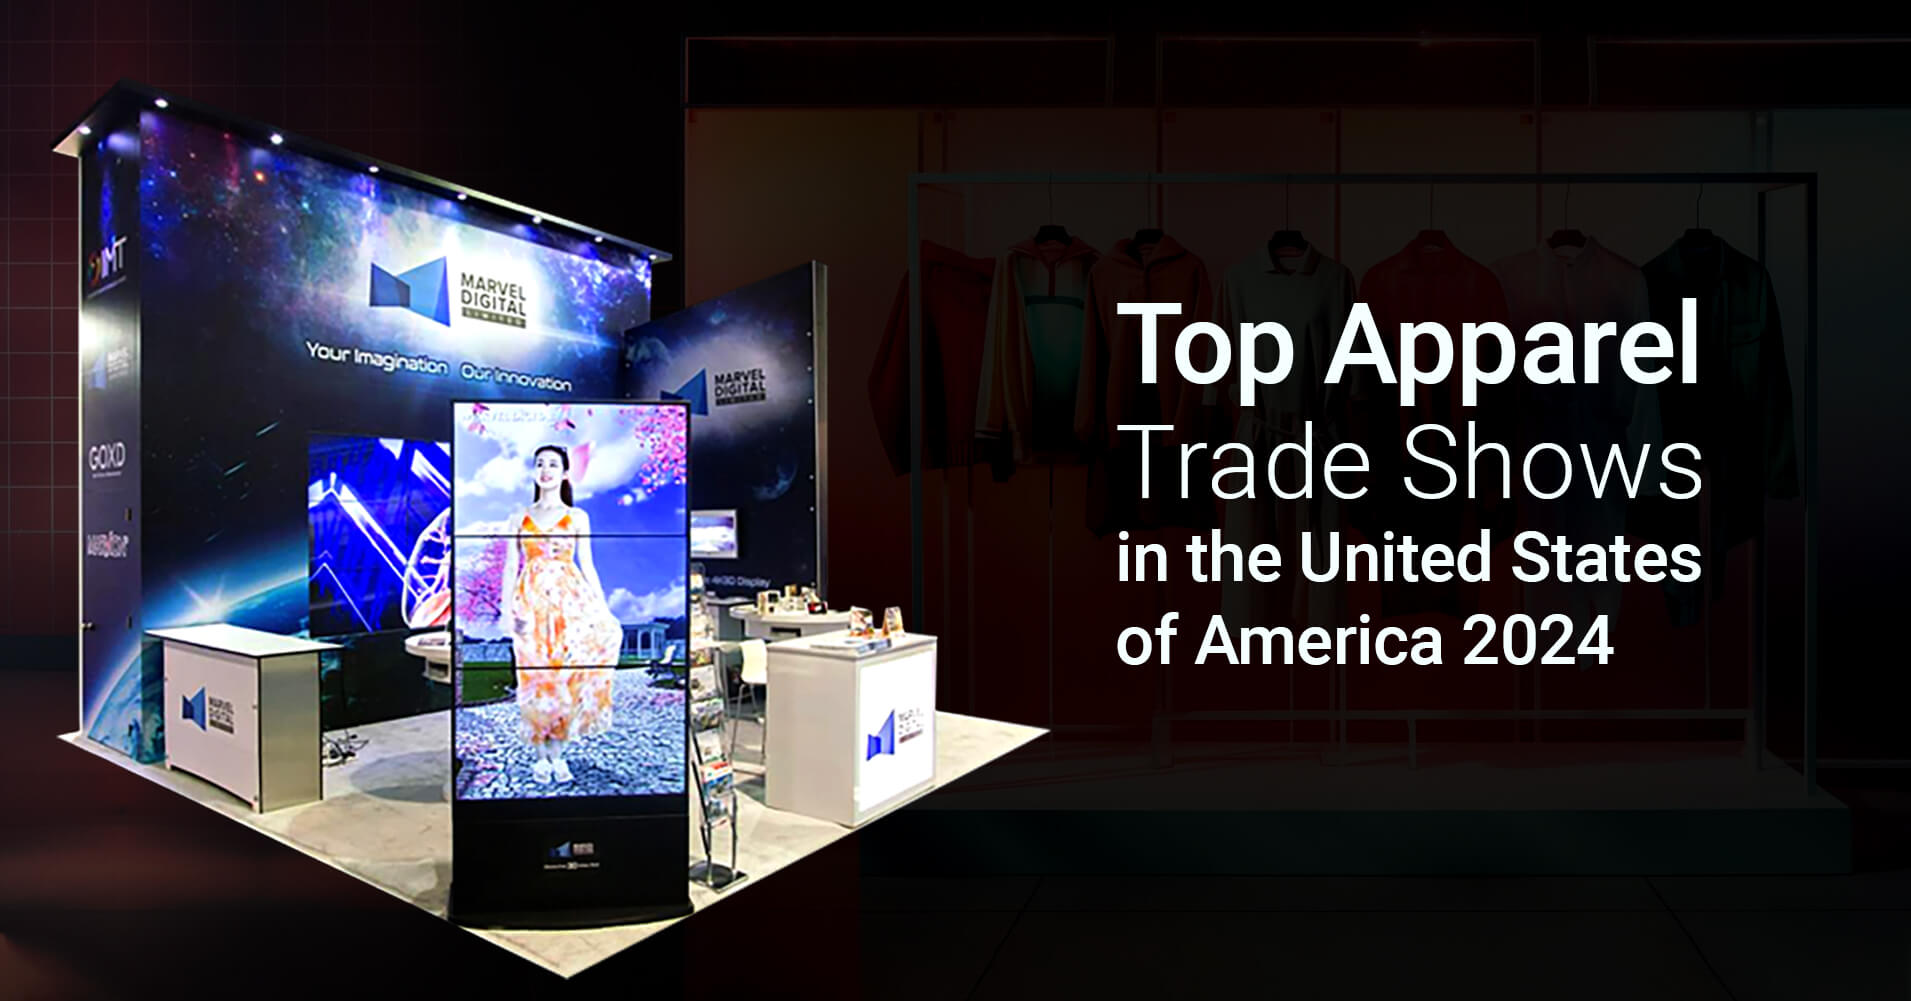 Leading Apparel Trade Shows in the USA in 2024